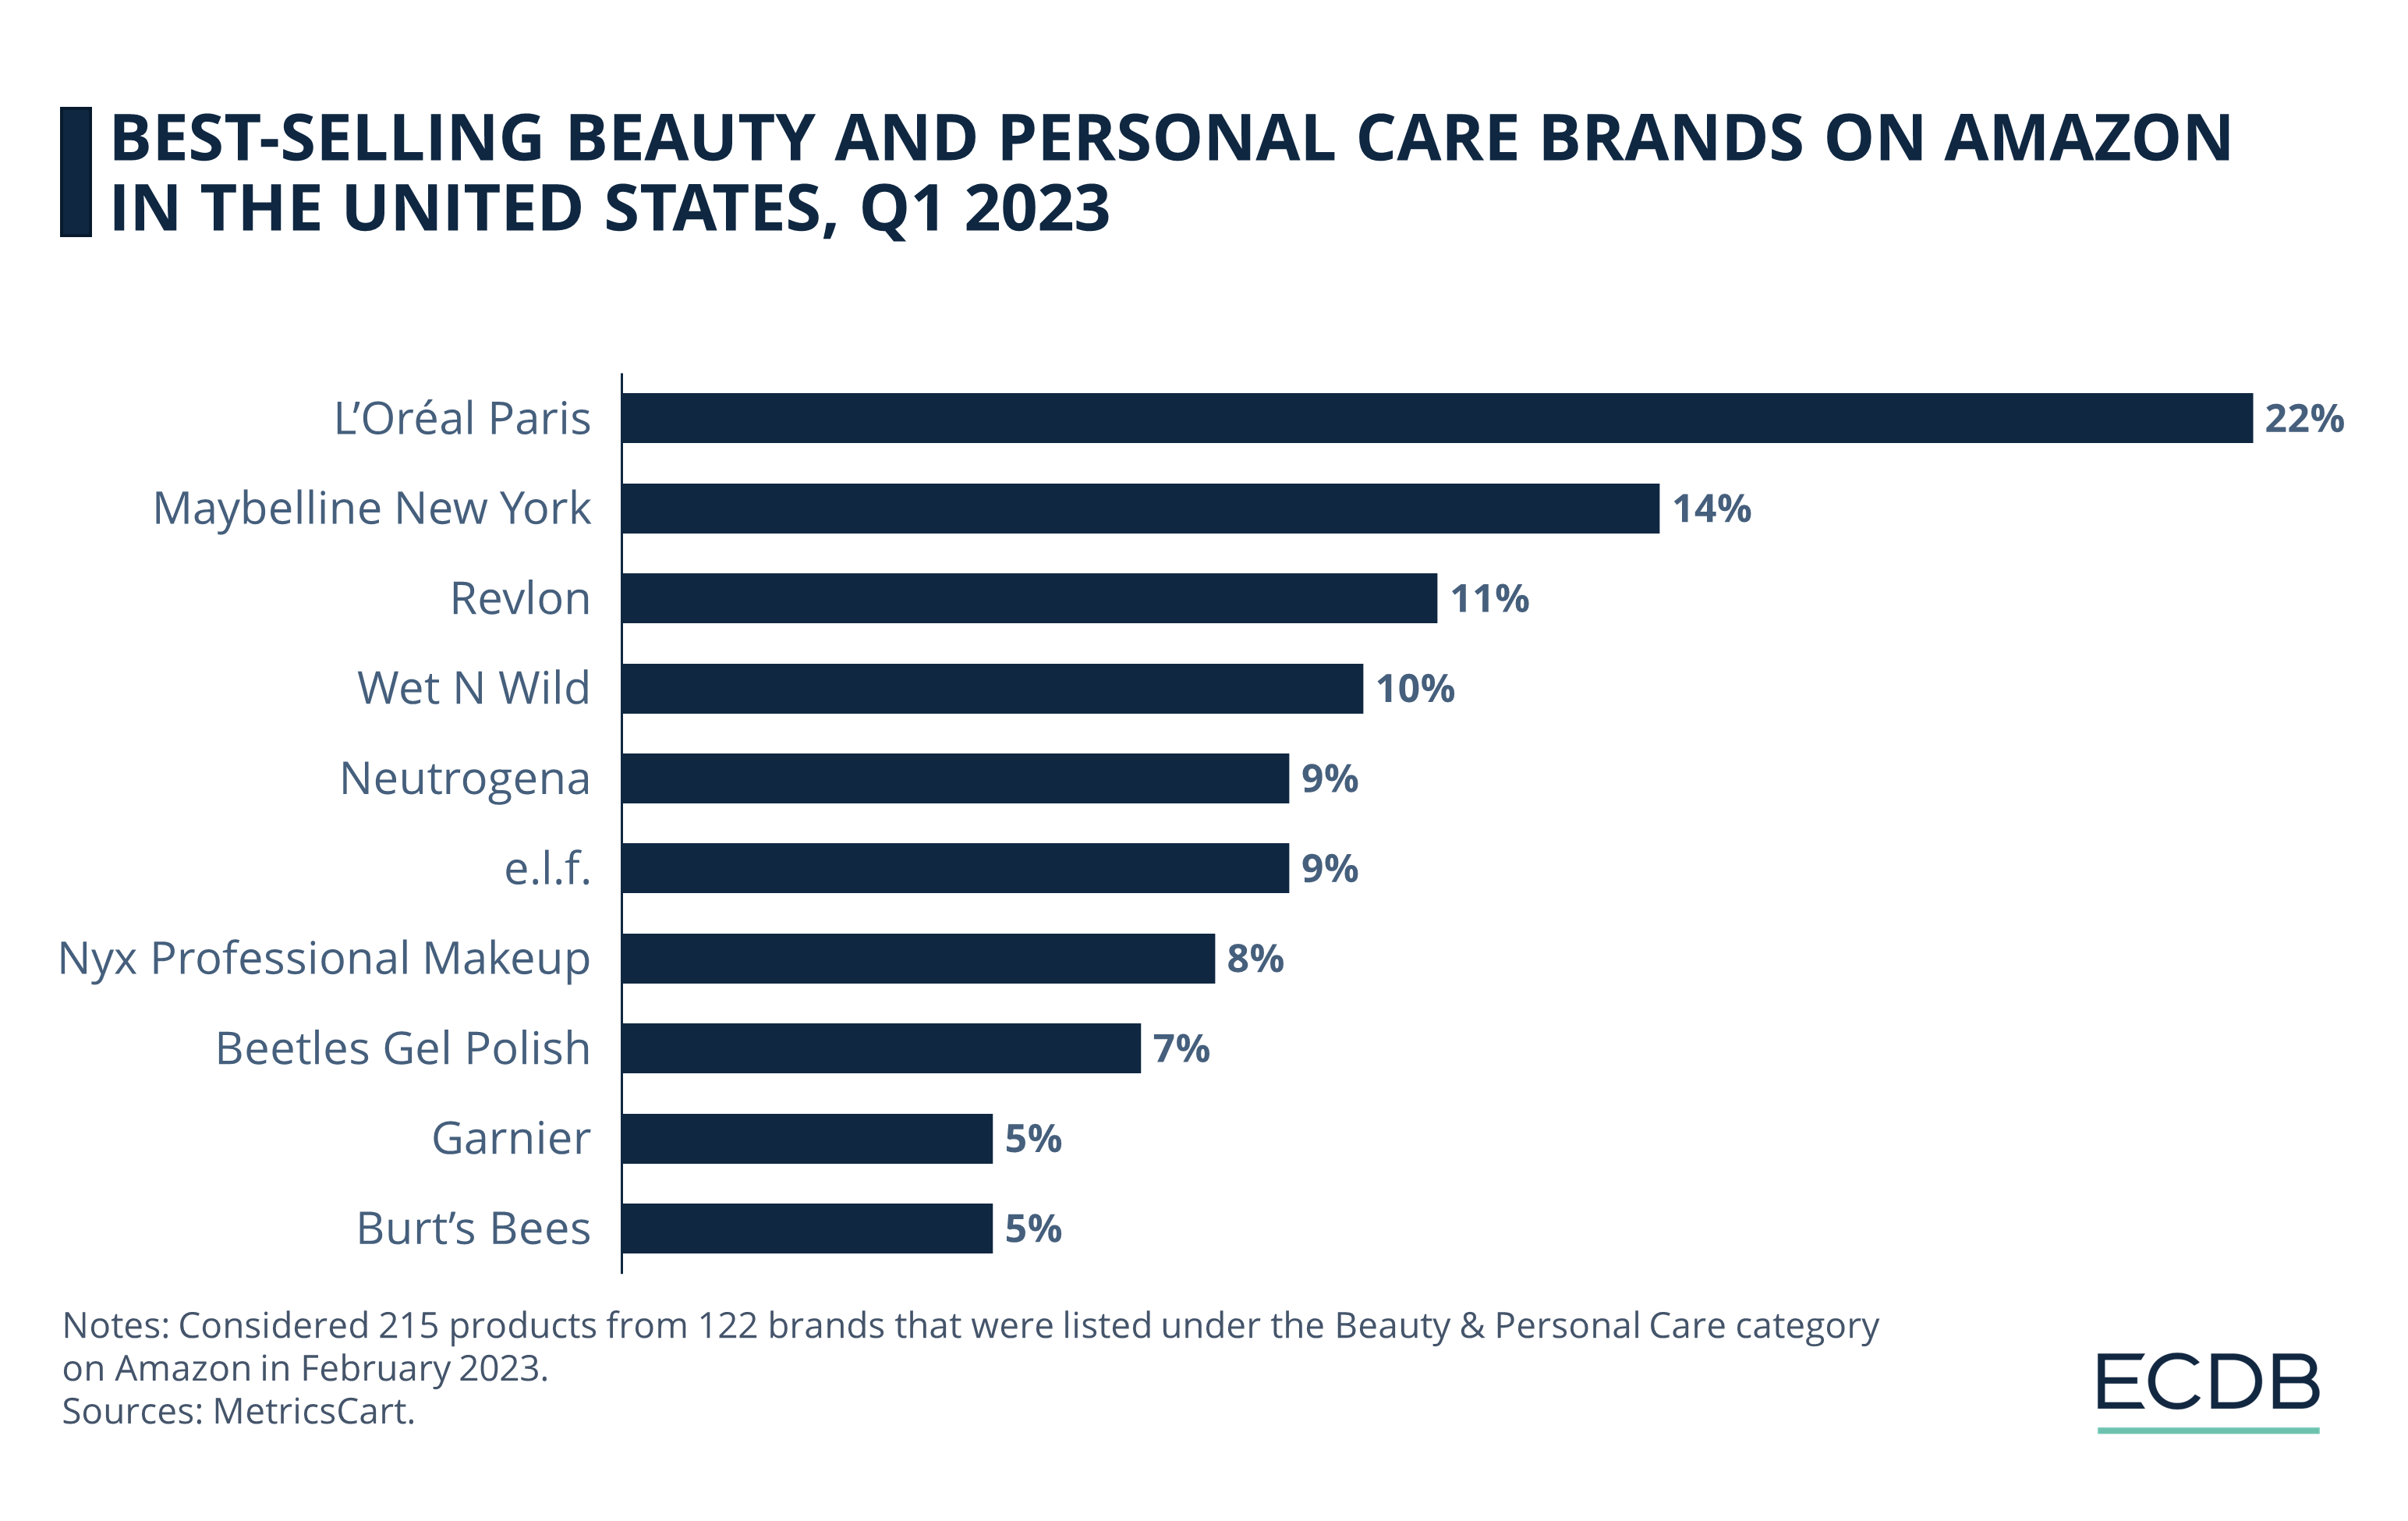 Best-Selling Beauty and Personal Care Brands on Amazon in the United States, Q1 2023 